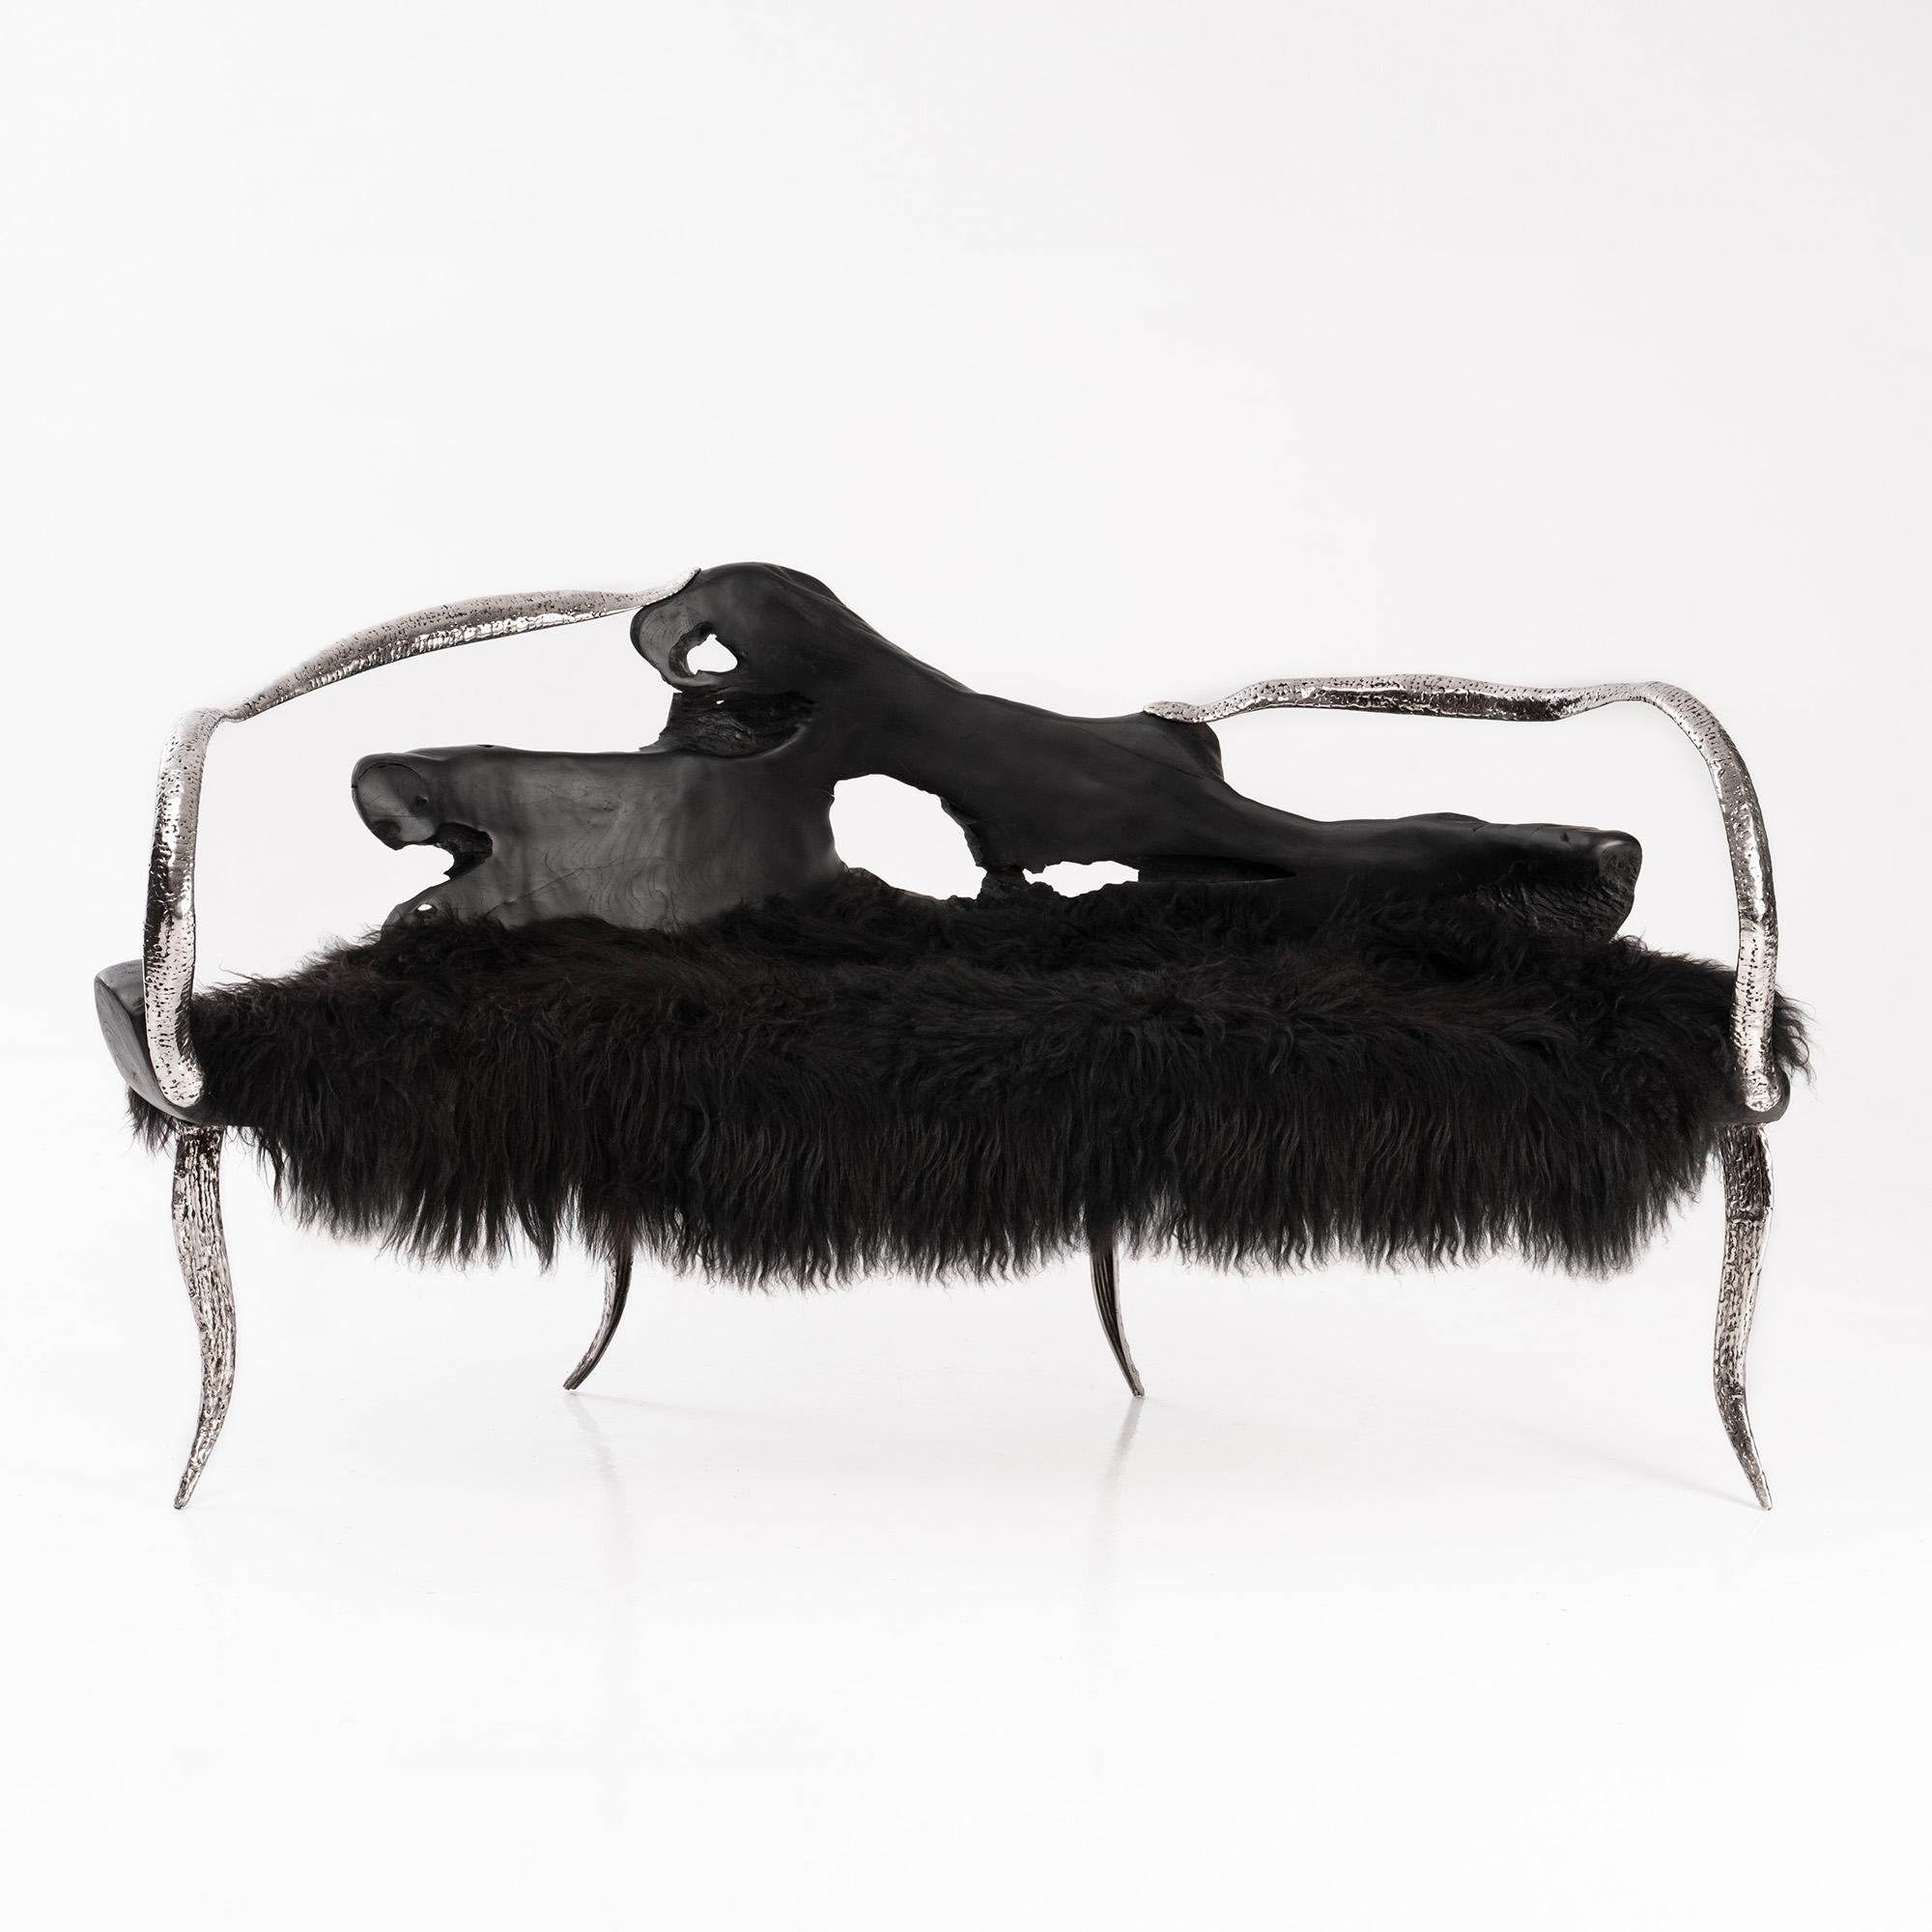 The Dark Knight Bench by Odditi
Dimensions: W 179 x D 85 x H 95 cm
Materials: FSC Certified Teak,  Icelandic Sheepskin, SS304 Grade Stainless Steel

A sleek, shadowy, organic silhouette. The Dark Knight steals the show with its bold sculptural form,